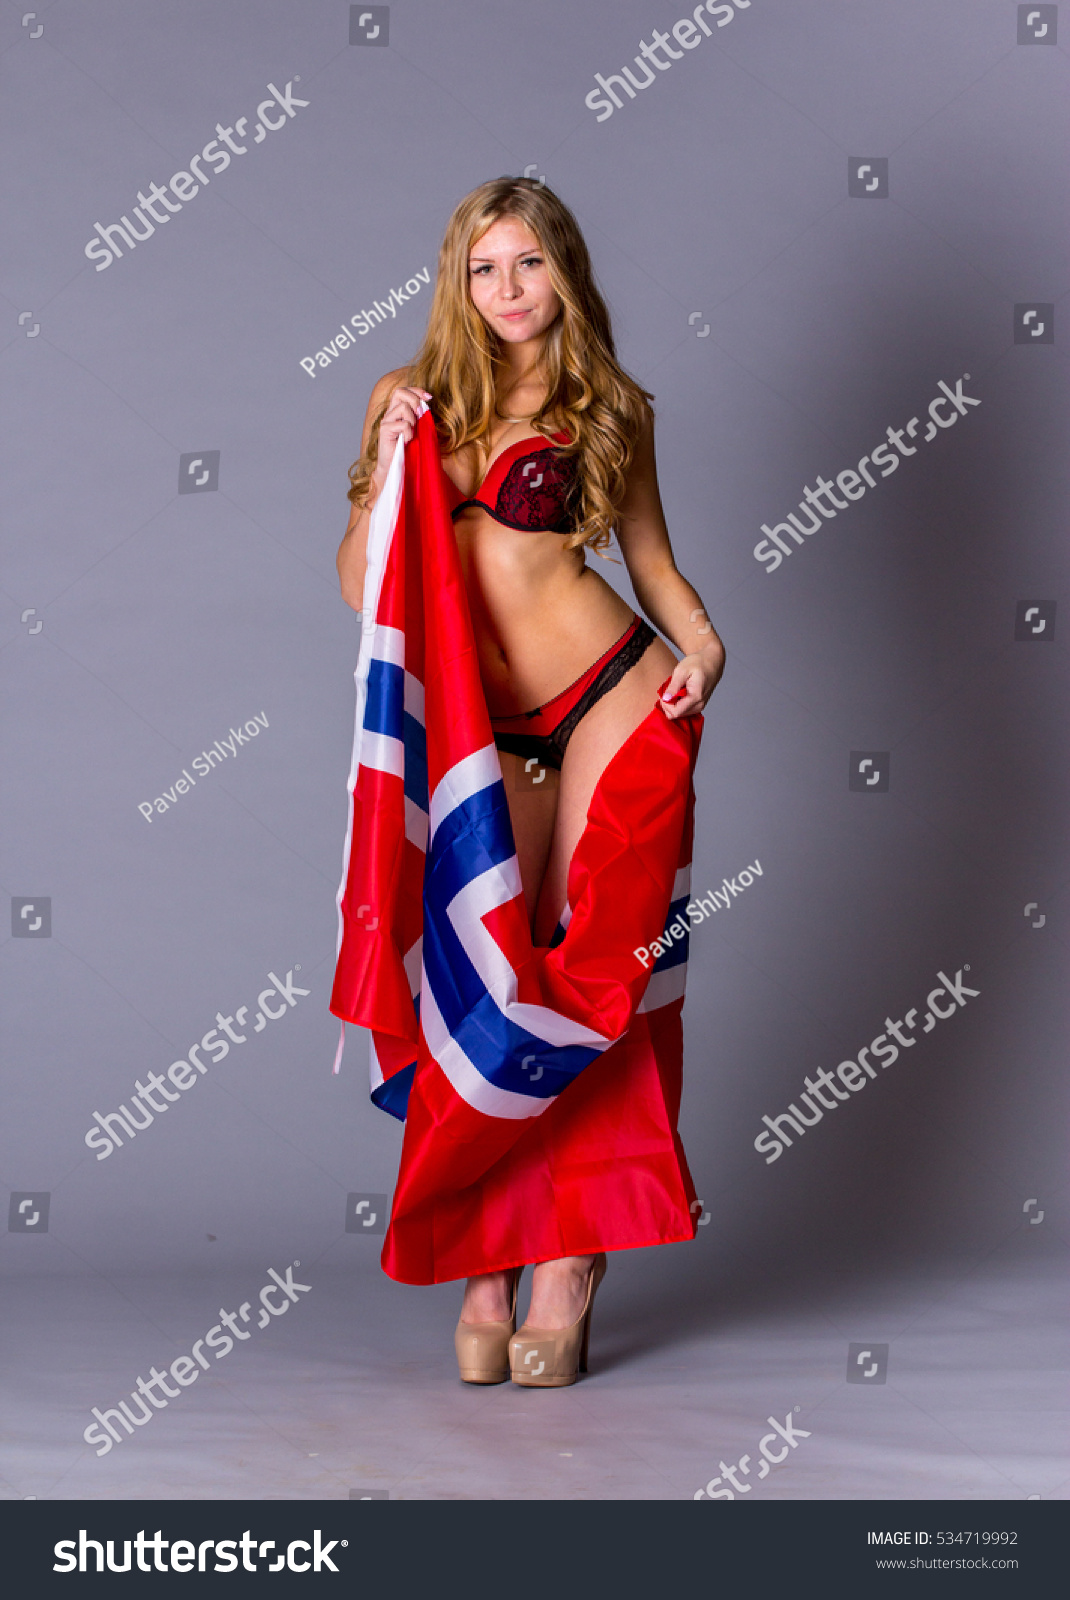 https://image.shutterstock.com/z/stock-photo-beautiful-woman-with-flag-of-norway-534719992.jpg